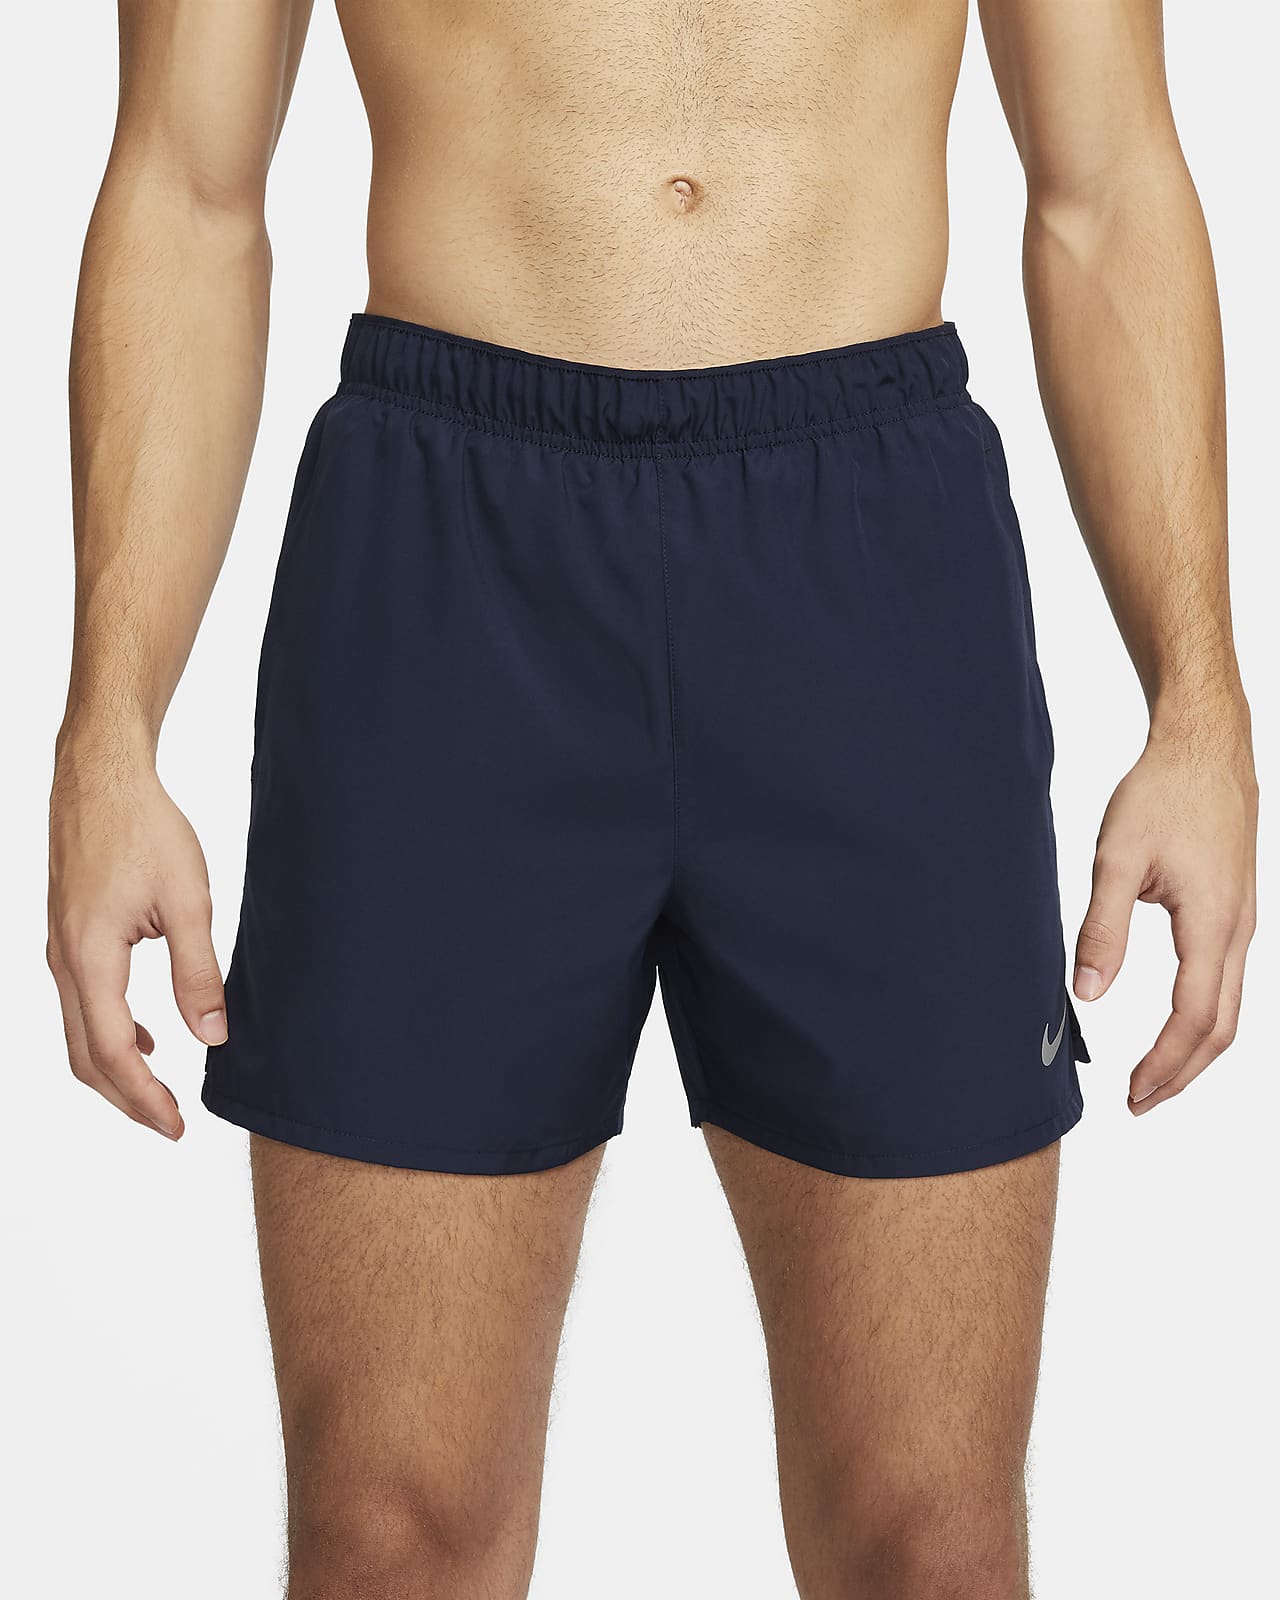 Barrio Muy lejos correr Nike Challenger Men's Dri-FIT 5" Brief-Lined Running Shorts. Nike.com